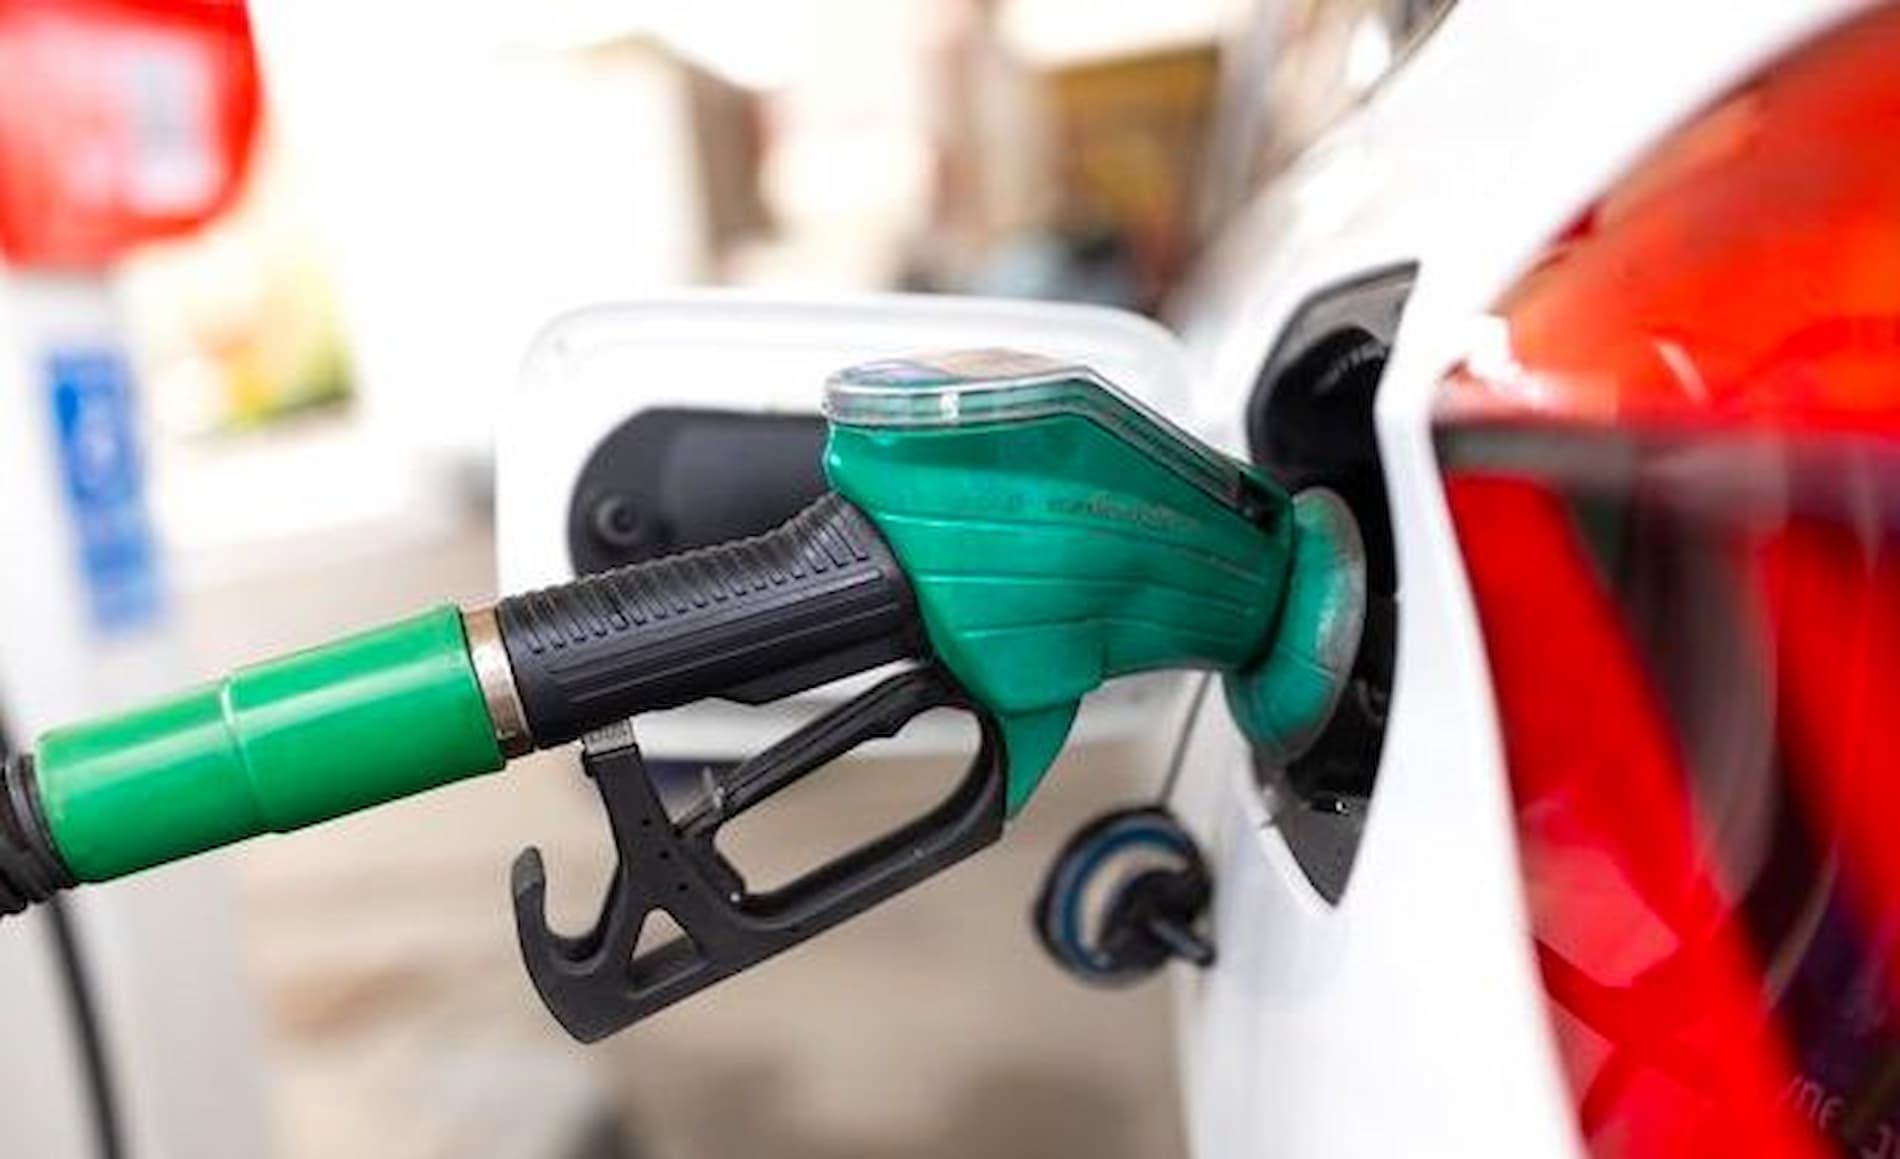 3 Energy And Fuel Prices Rise In The UK